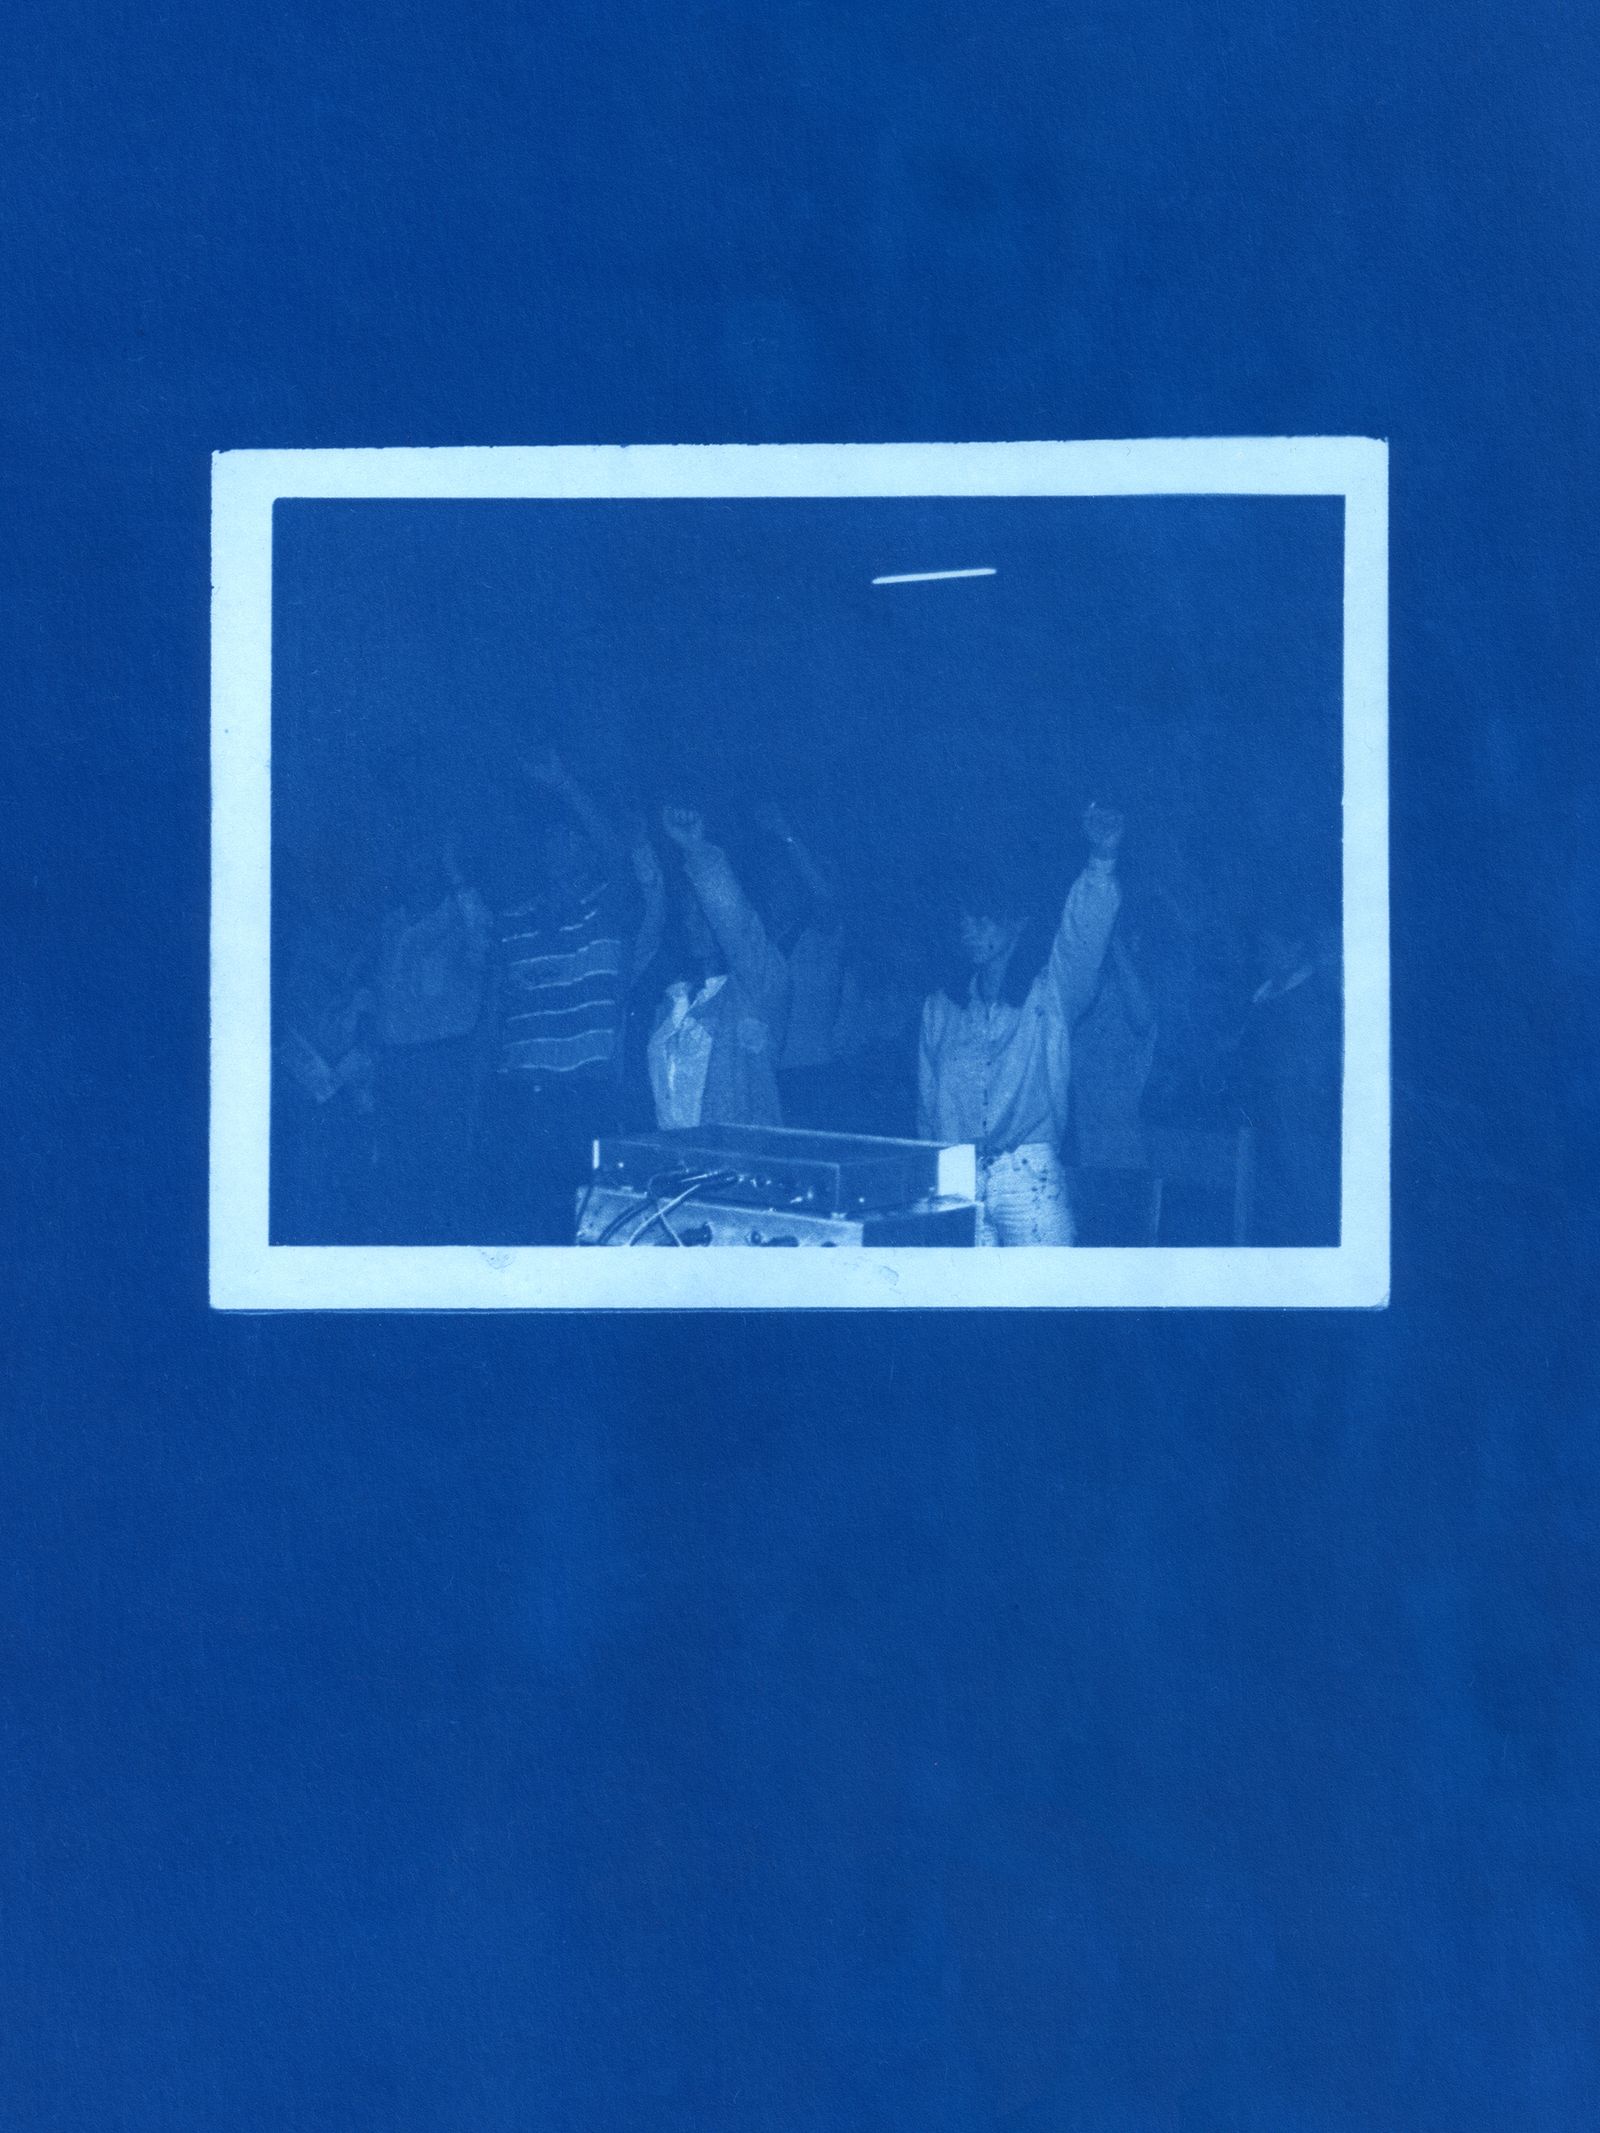 © Daniel Mebarek - BOLIVIA. La Paz. Students raise their fists during an assembly. Cyanotype on mat paper.